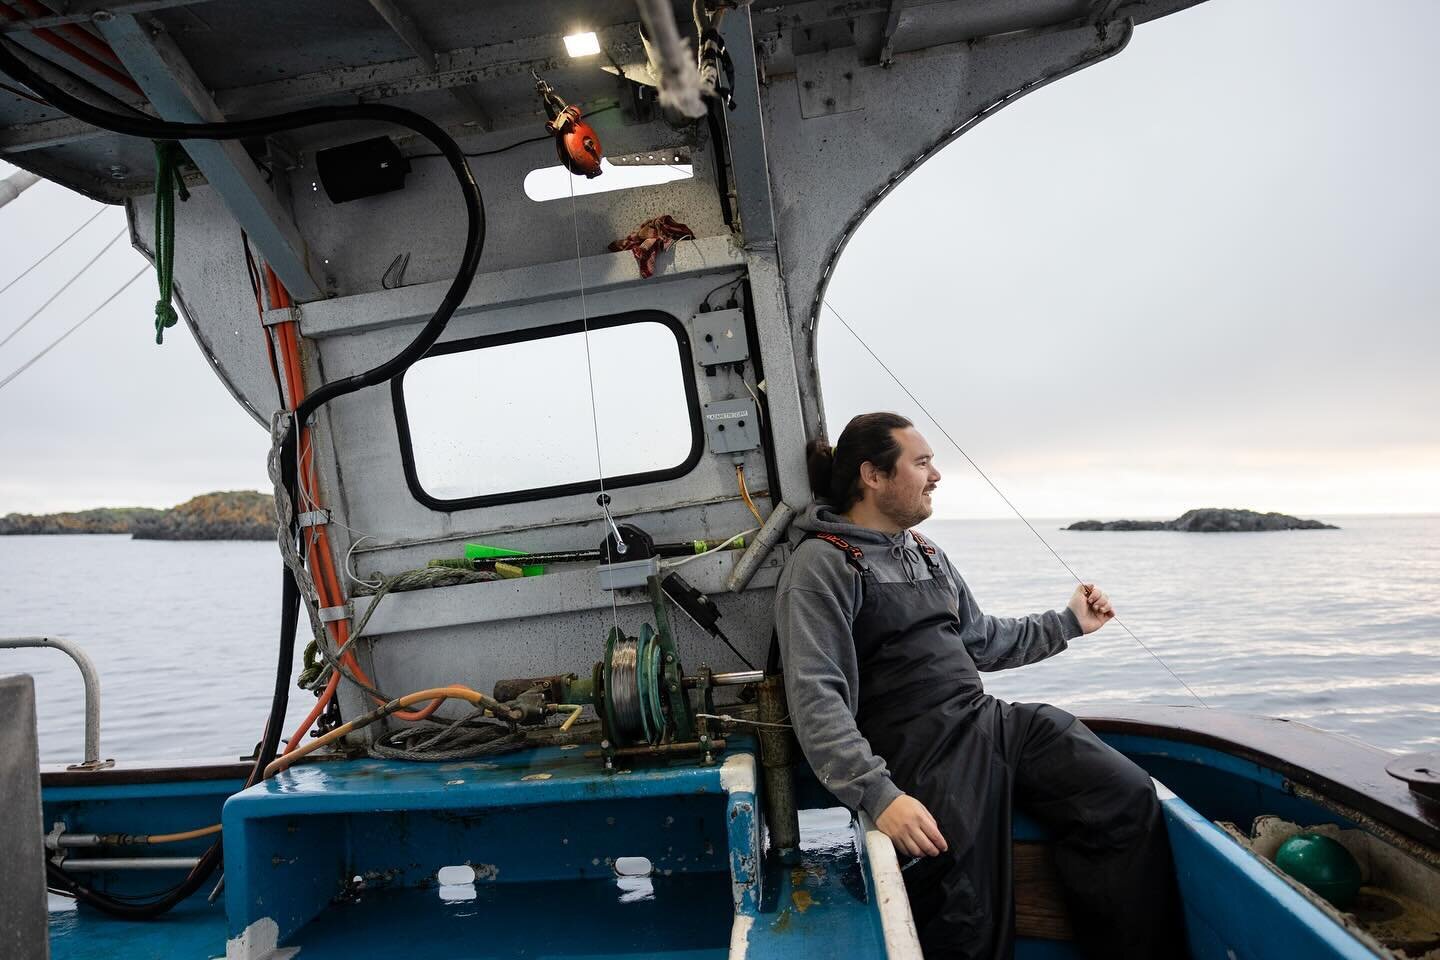 @naturalgiftseafoods specializes in sustainably caught Albacore Tuna and Lingcod. As a family-run business, Kingsley captains the ship with his brother, Alistair, providing support. With various certifications and recognitions for their low-impact me